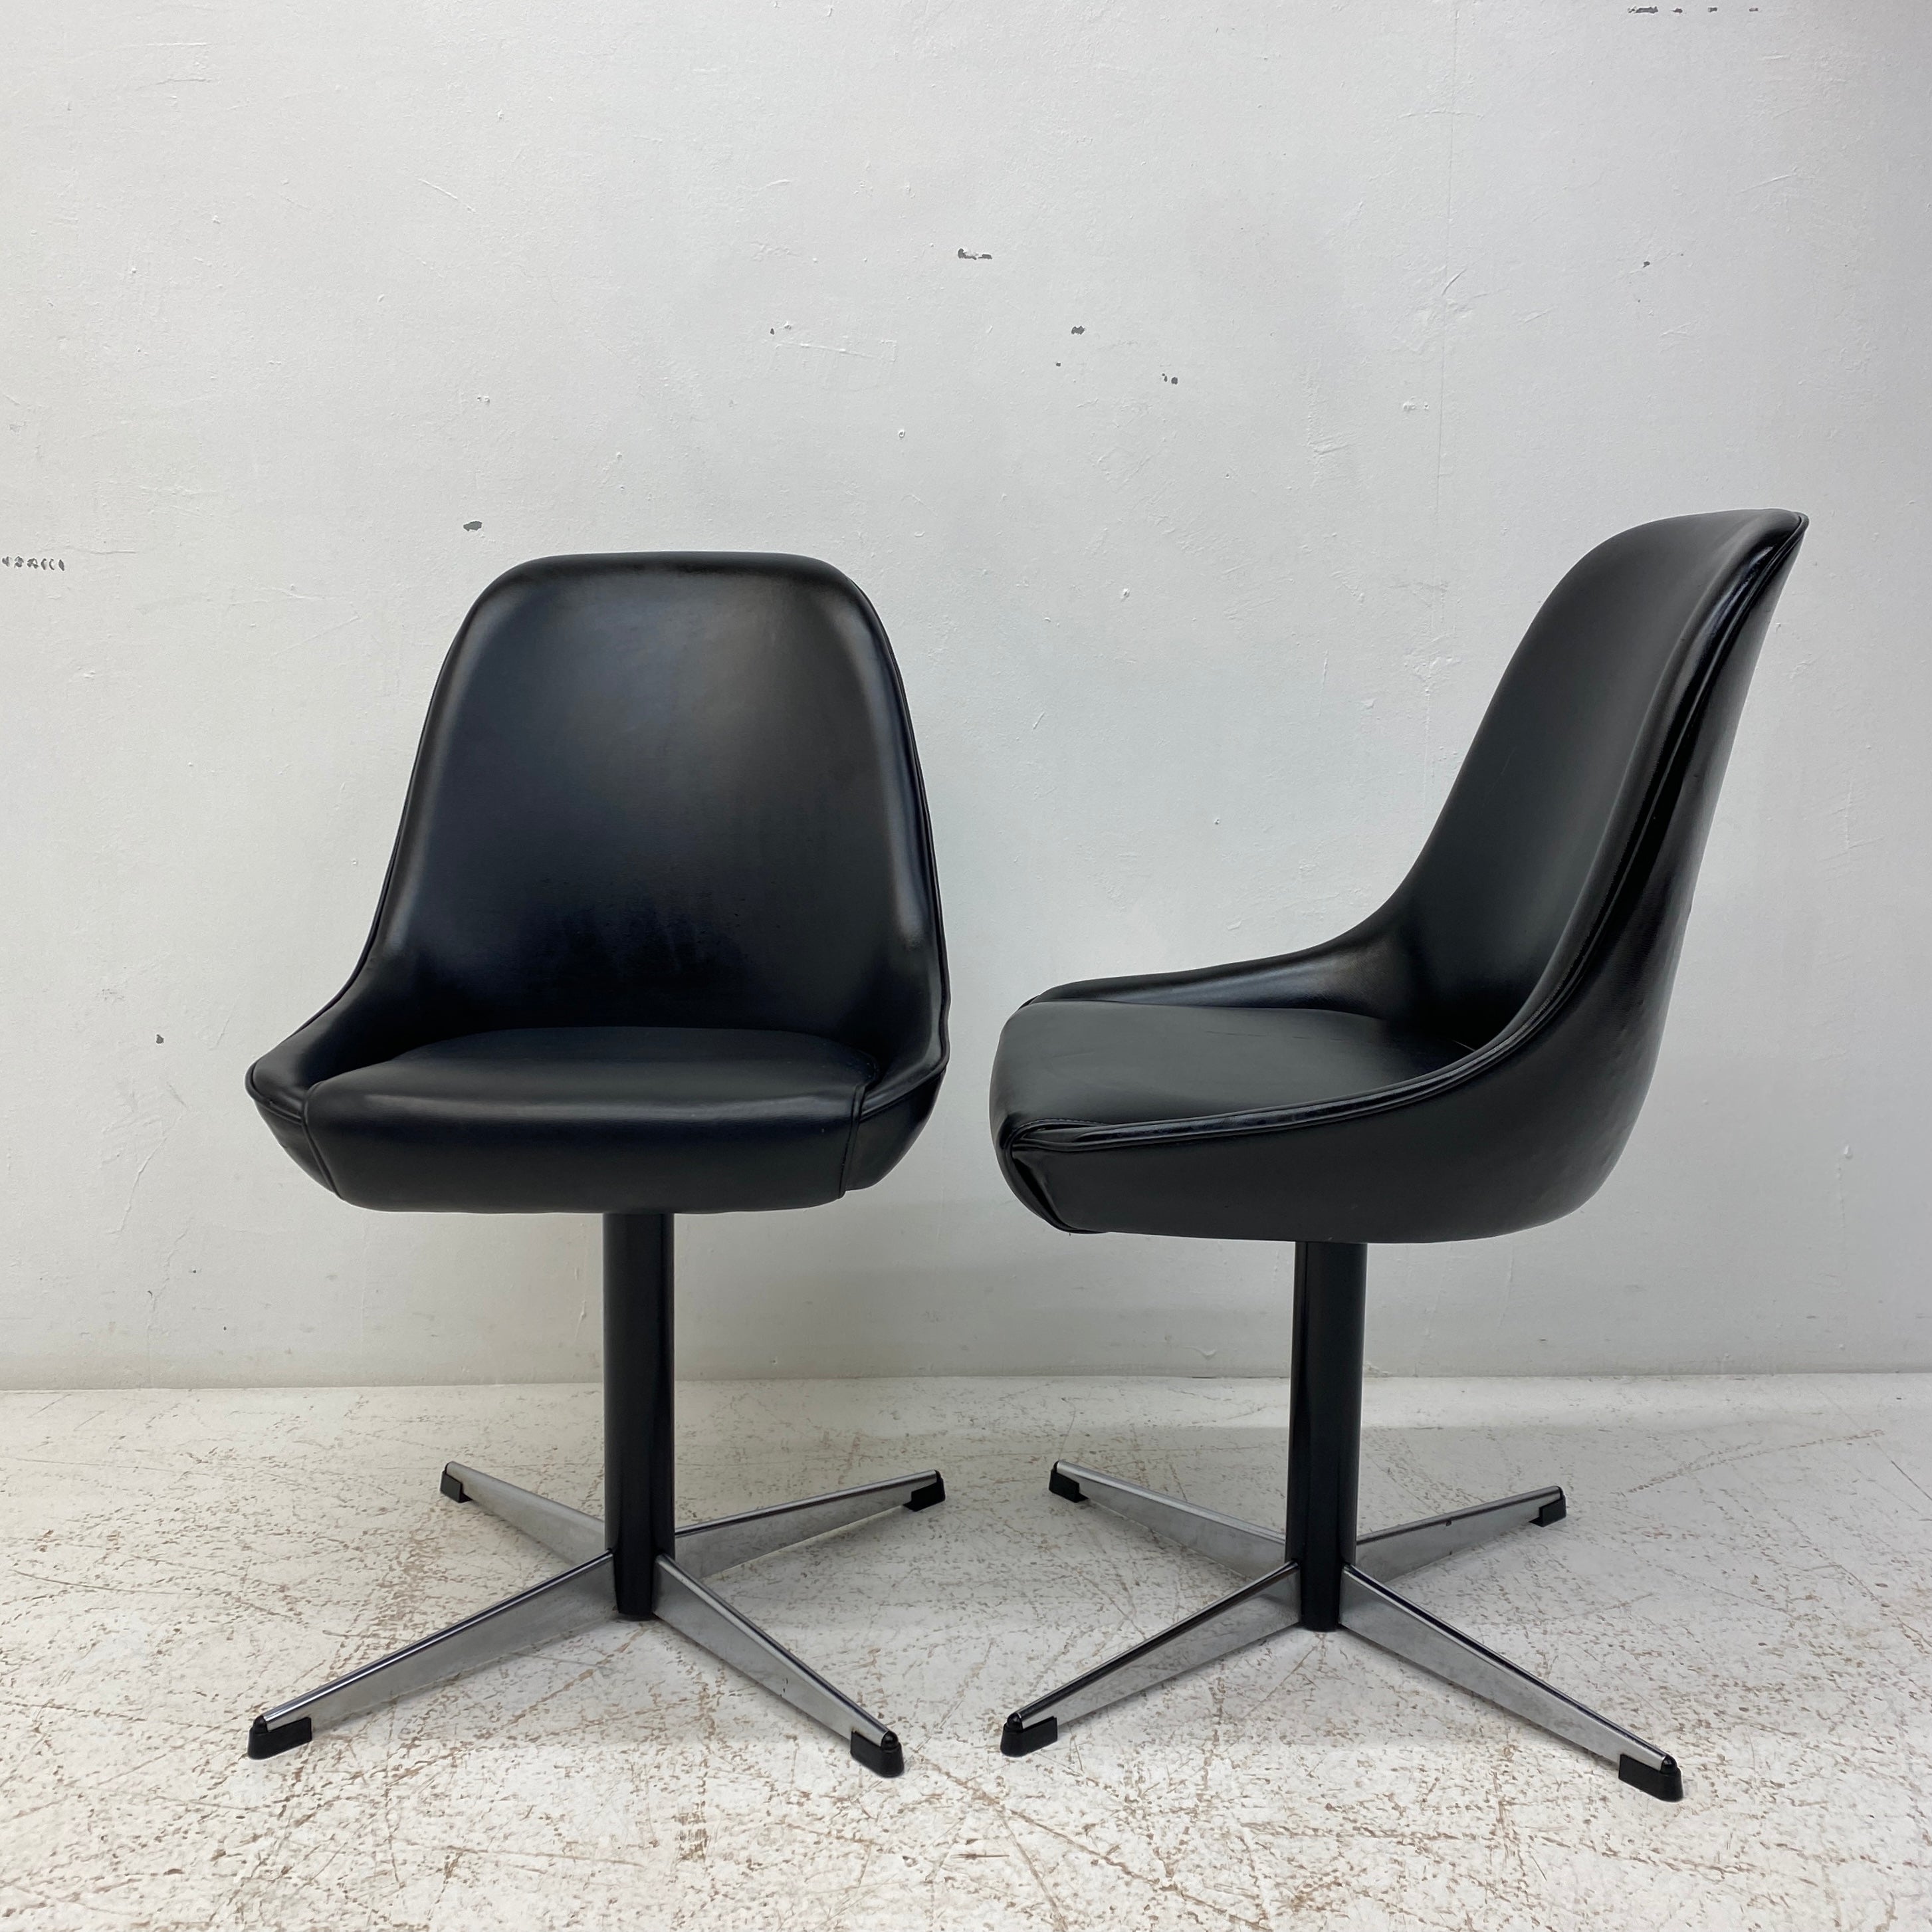 Side And Front Of Black Vinyl Swivel Chairs